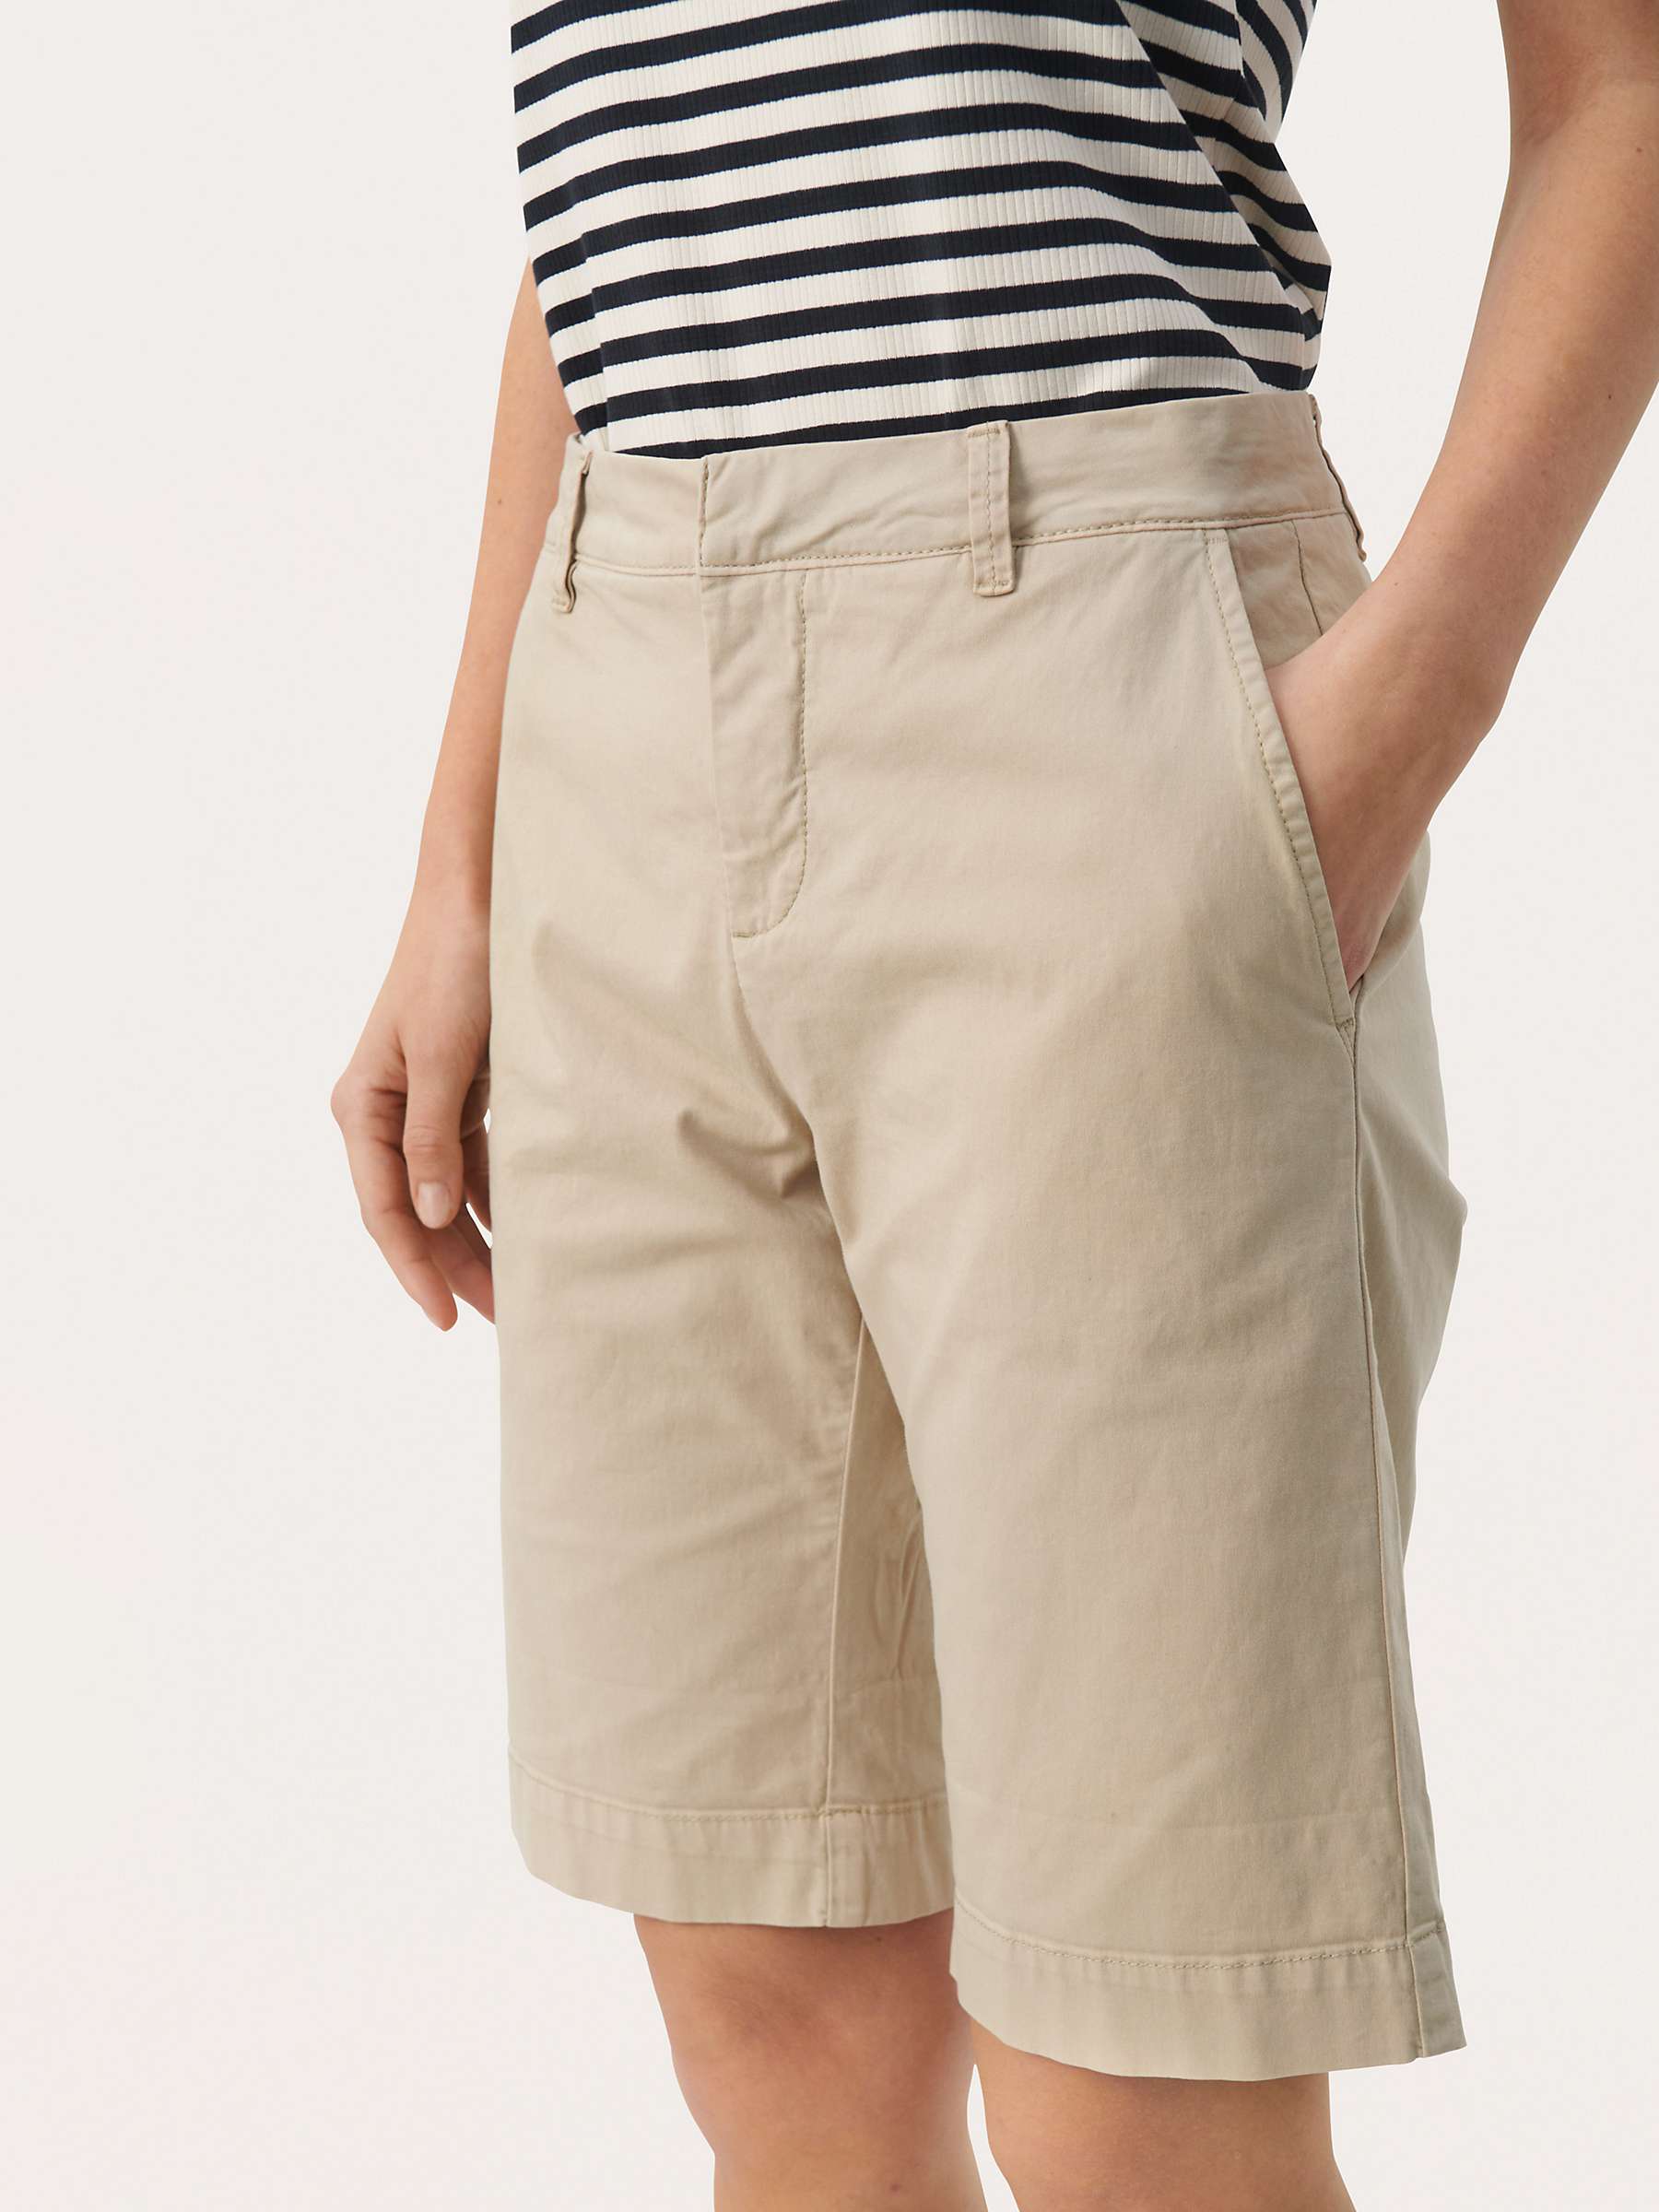 Buy Part Two Hanijan Regular Fit Folded Cuff Shorts, White Pepper Online at johnlewis.com